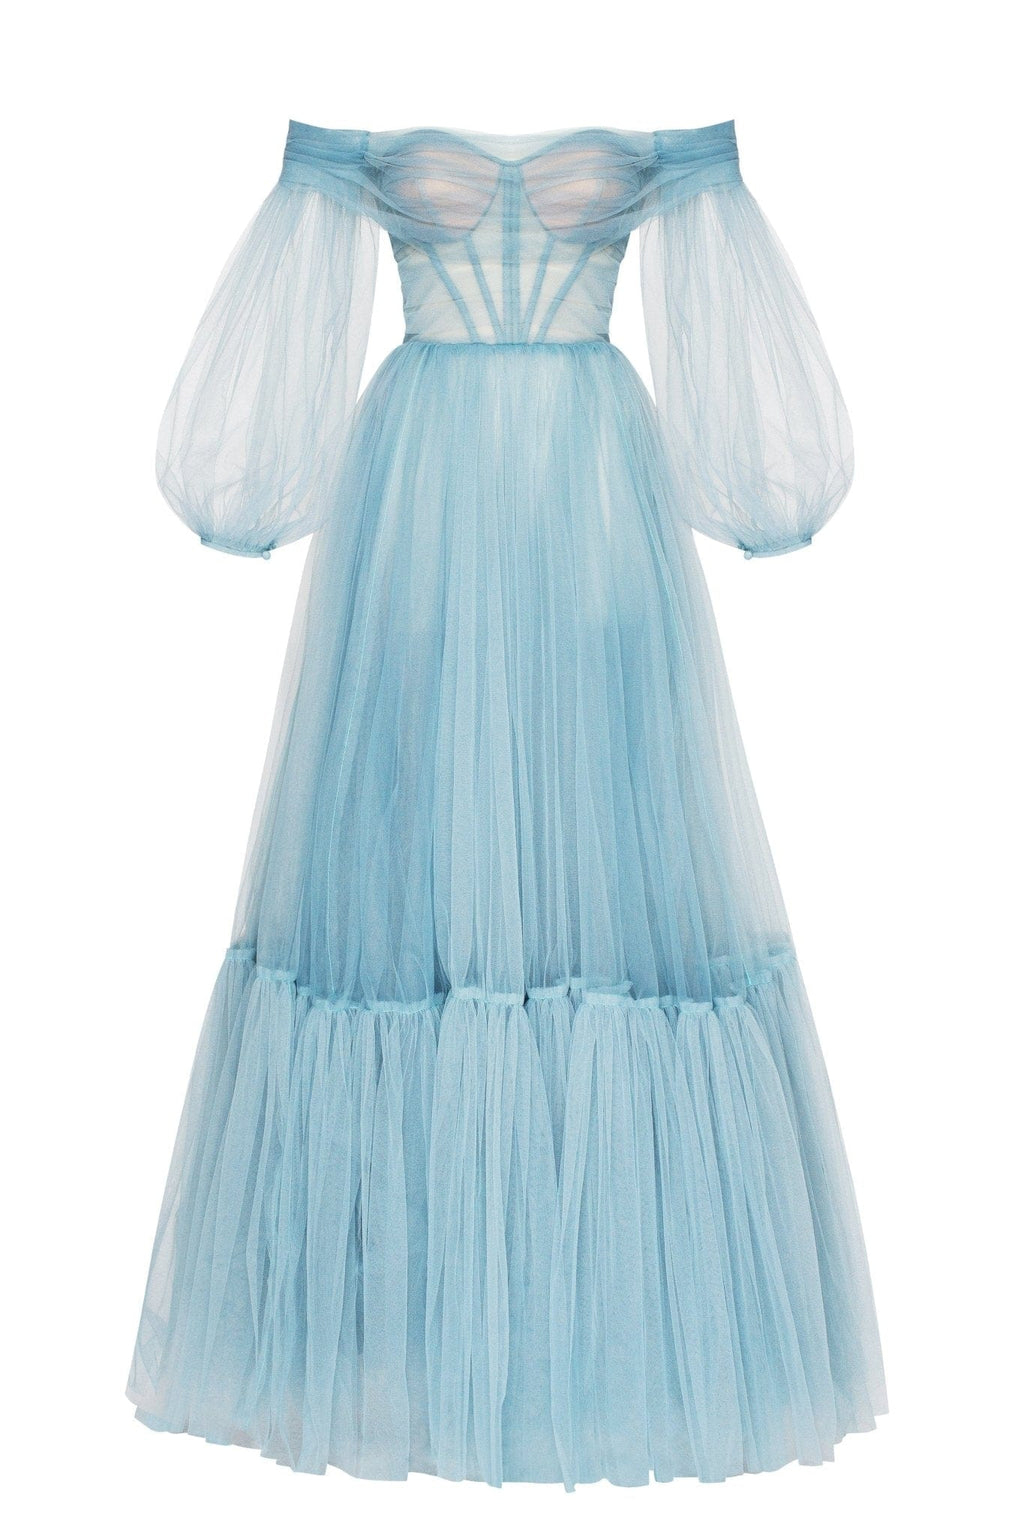 Nishas Closet Birthday Party Tiered Gown Dress for Girls (Sky Blue,  Size:32, 9-10 Years) : Amazon.in: Clothing & Accessories